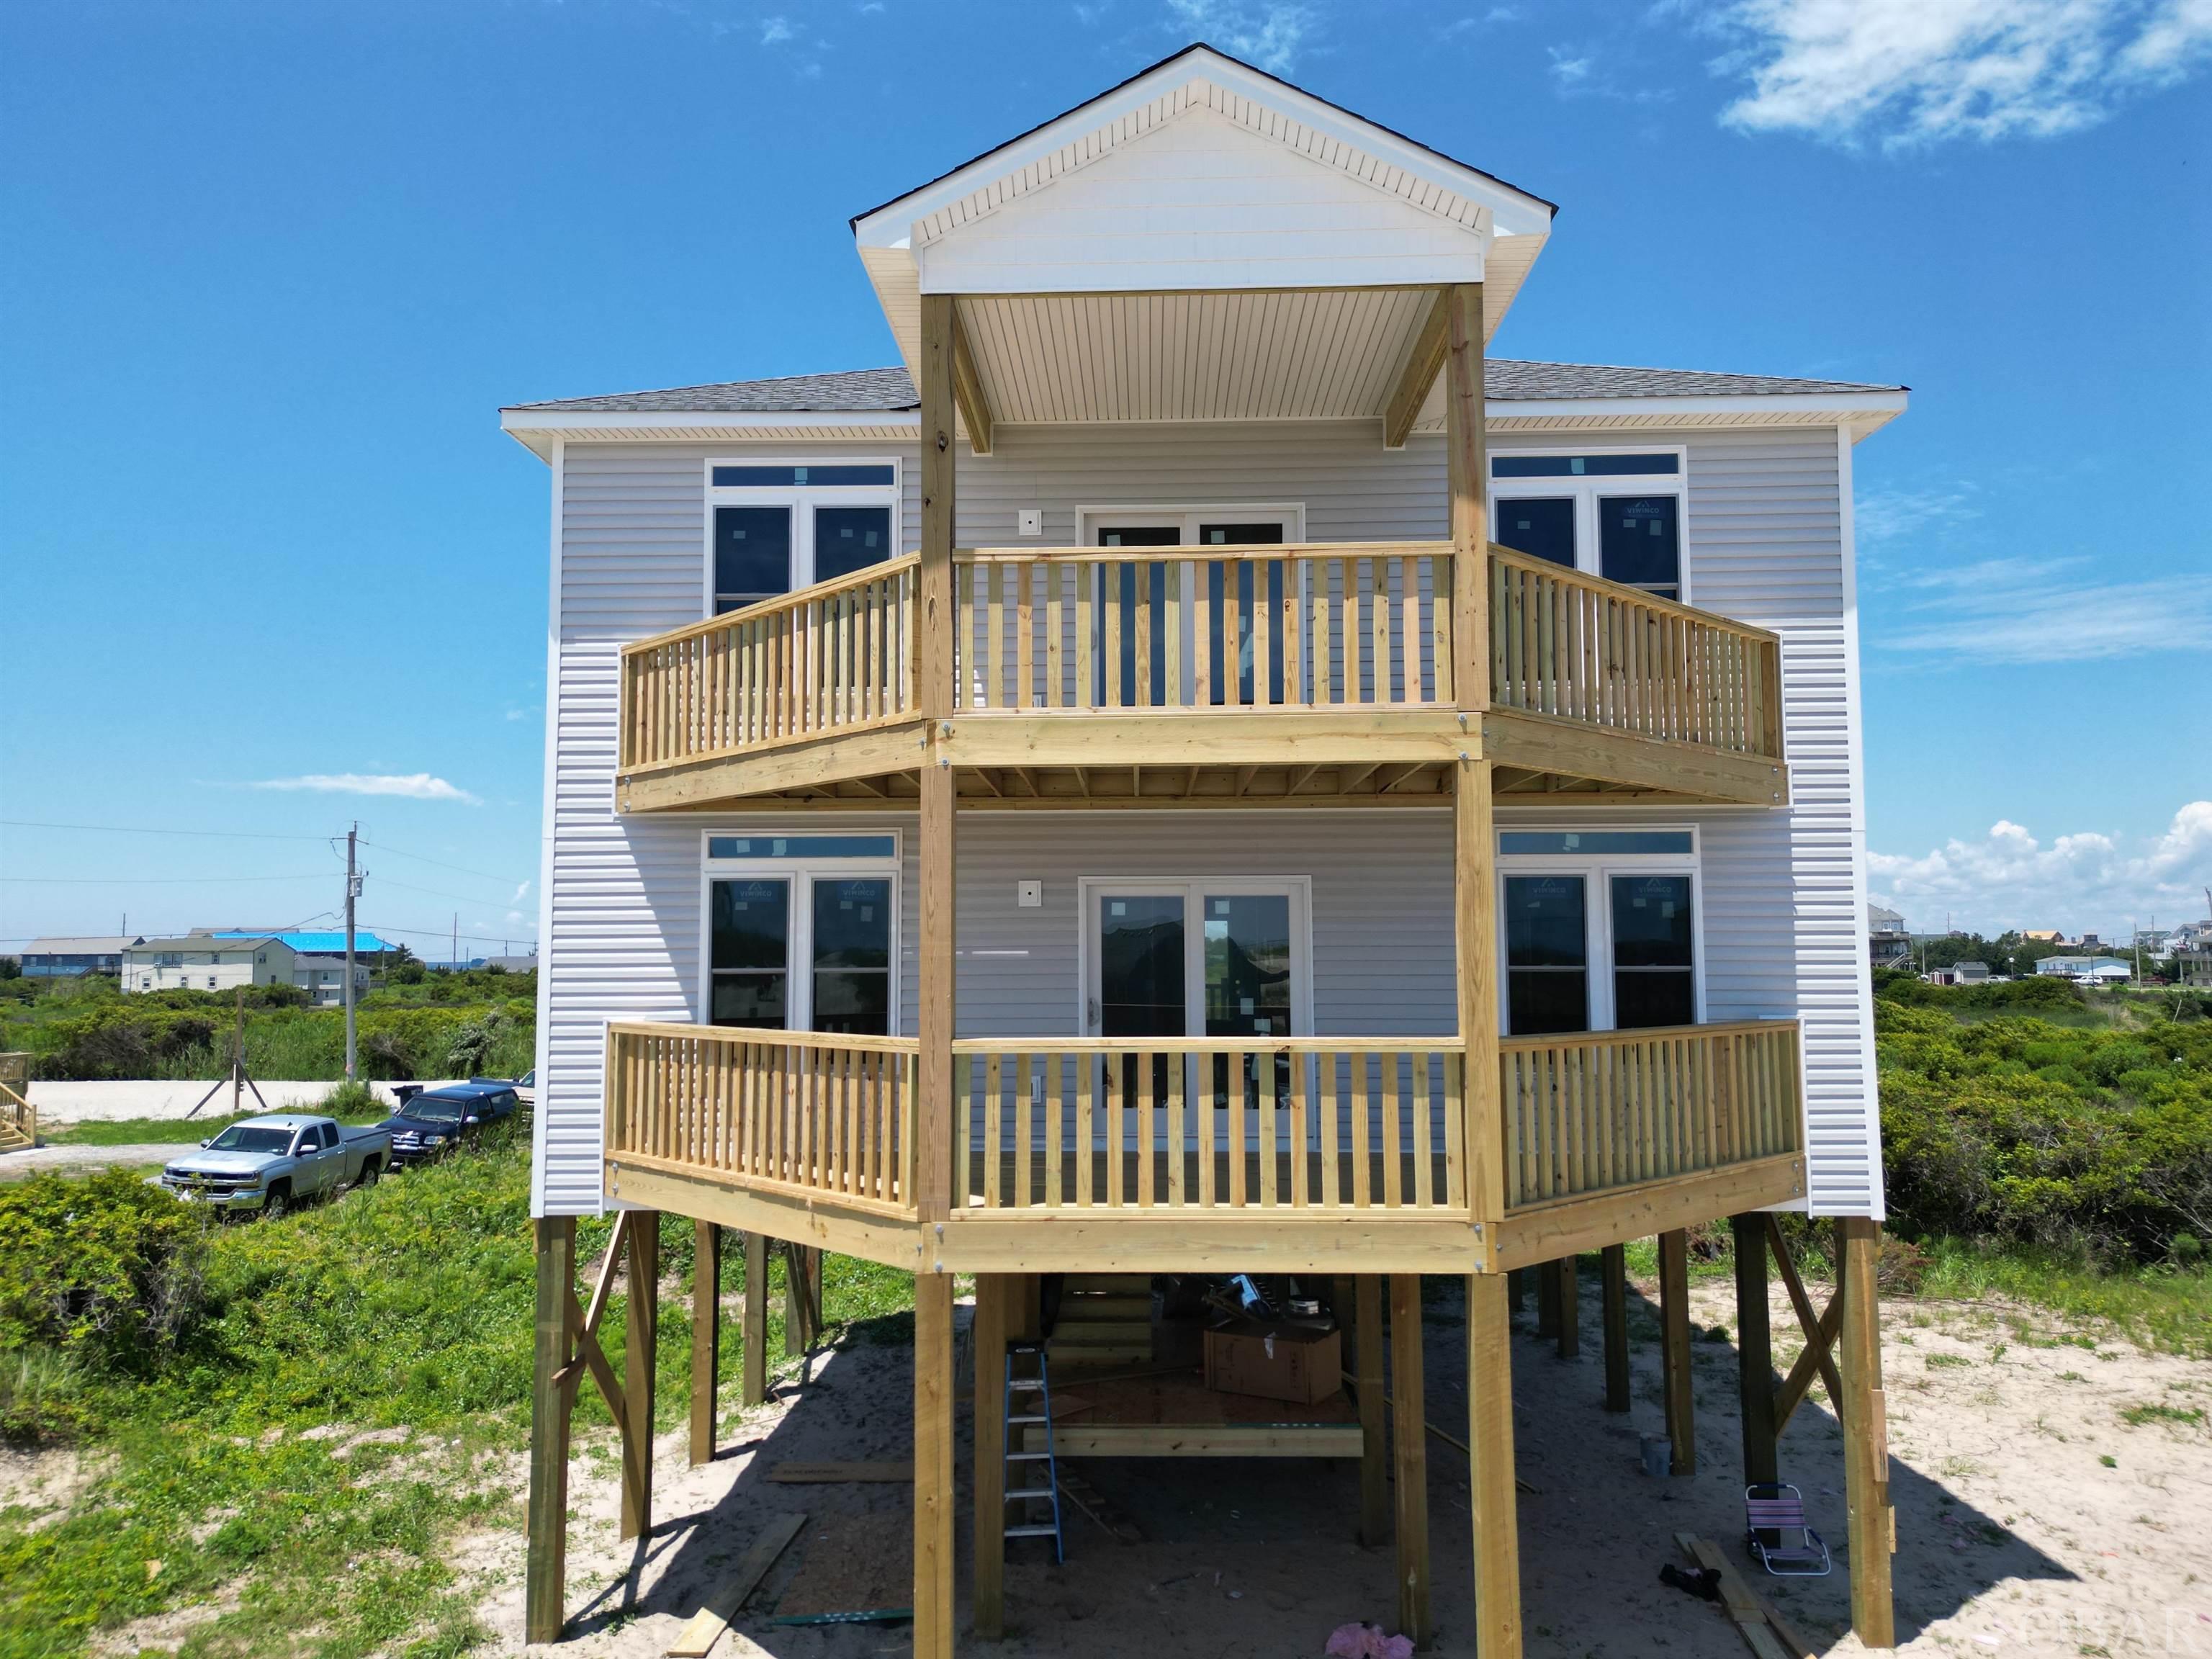 New construction with SPECTACULAR ocean views!   Estimated advertised rental income projections of $135,000 and $159,000 provided by Resort Realty and Vacasa. Located just steps from the beach in a prime water sports location close to the Rodanthe Pier. Spacious four bedroom, 4 and a half baths open concept floor plan.  First floor master suite and two additional bedrooms, full bath, bonus room and laundry.  Main level features kitchen with granite counter tops, custom tile back splash, appliances opening  into family room and a second master suite.  With over 700 square feet of deck space, expect to sit and watch beautiful sunrises and sunsets.   An additional bonus area of approximately 700 square feet of unfinished space located above flood plain.  Construction projected to be completed the end of August. You DON'T want to miss this rare opportunity to purchase a brand new home! The ocean views will truly WOW you!